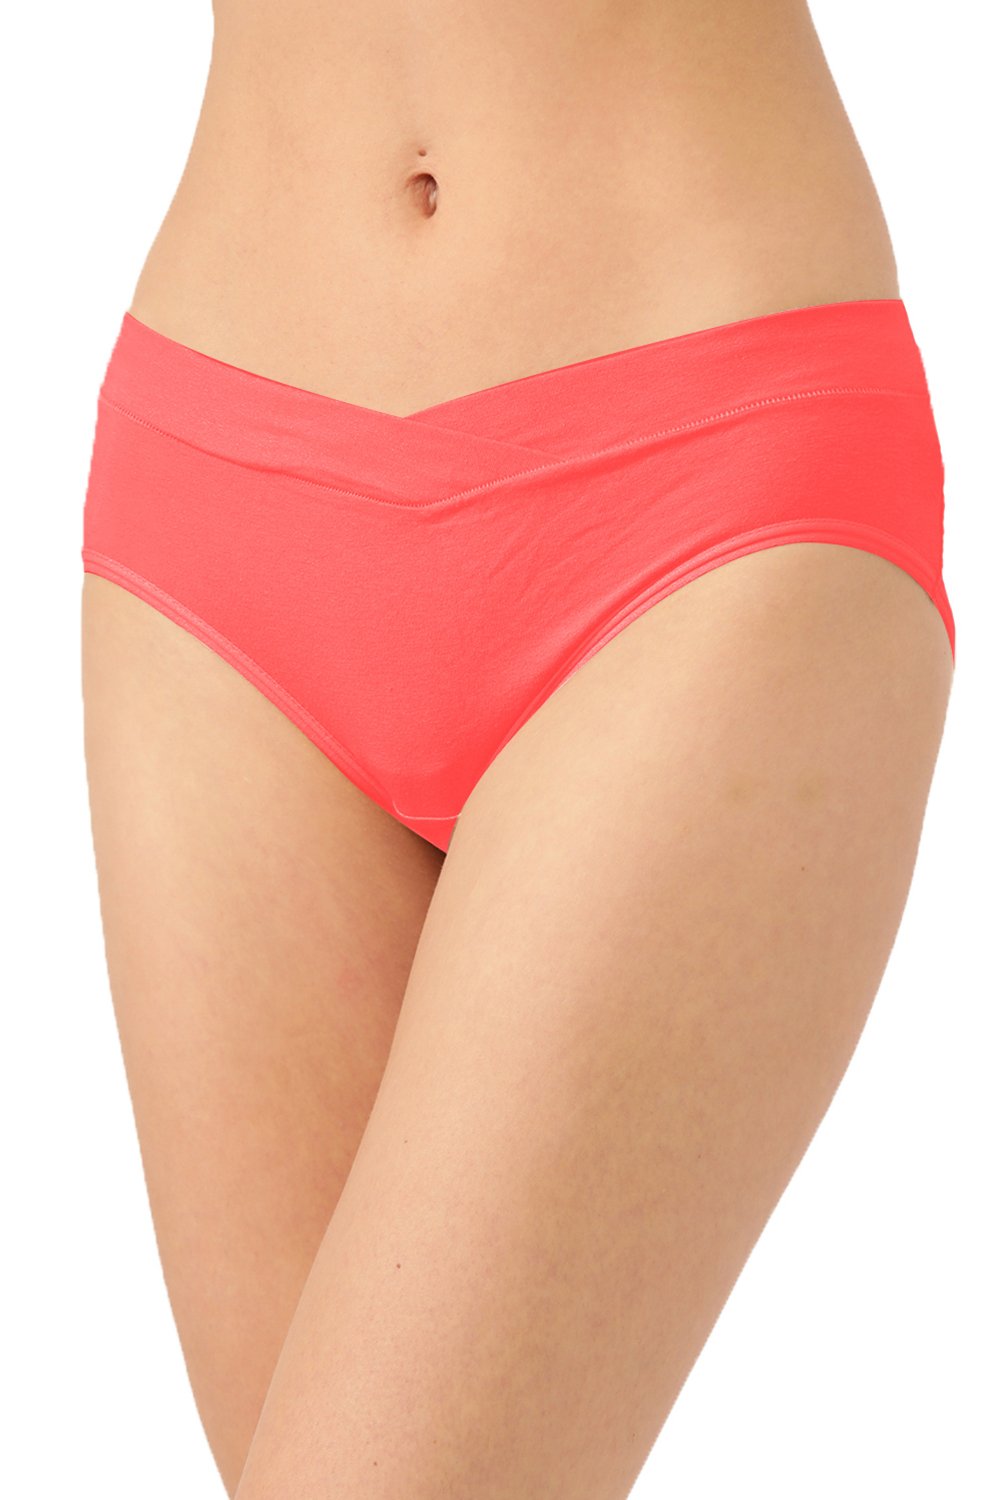 Organic Cotton Antimicrobial Maternity Panty-IMP102-Skin_Bright Pink